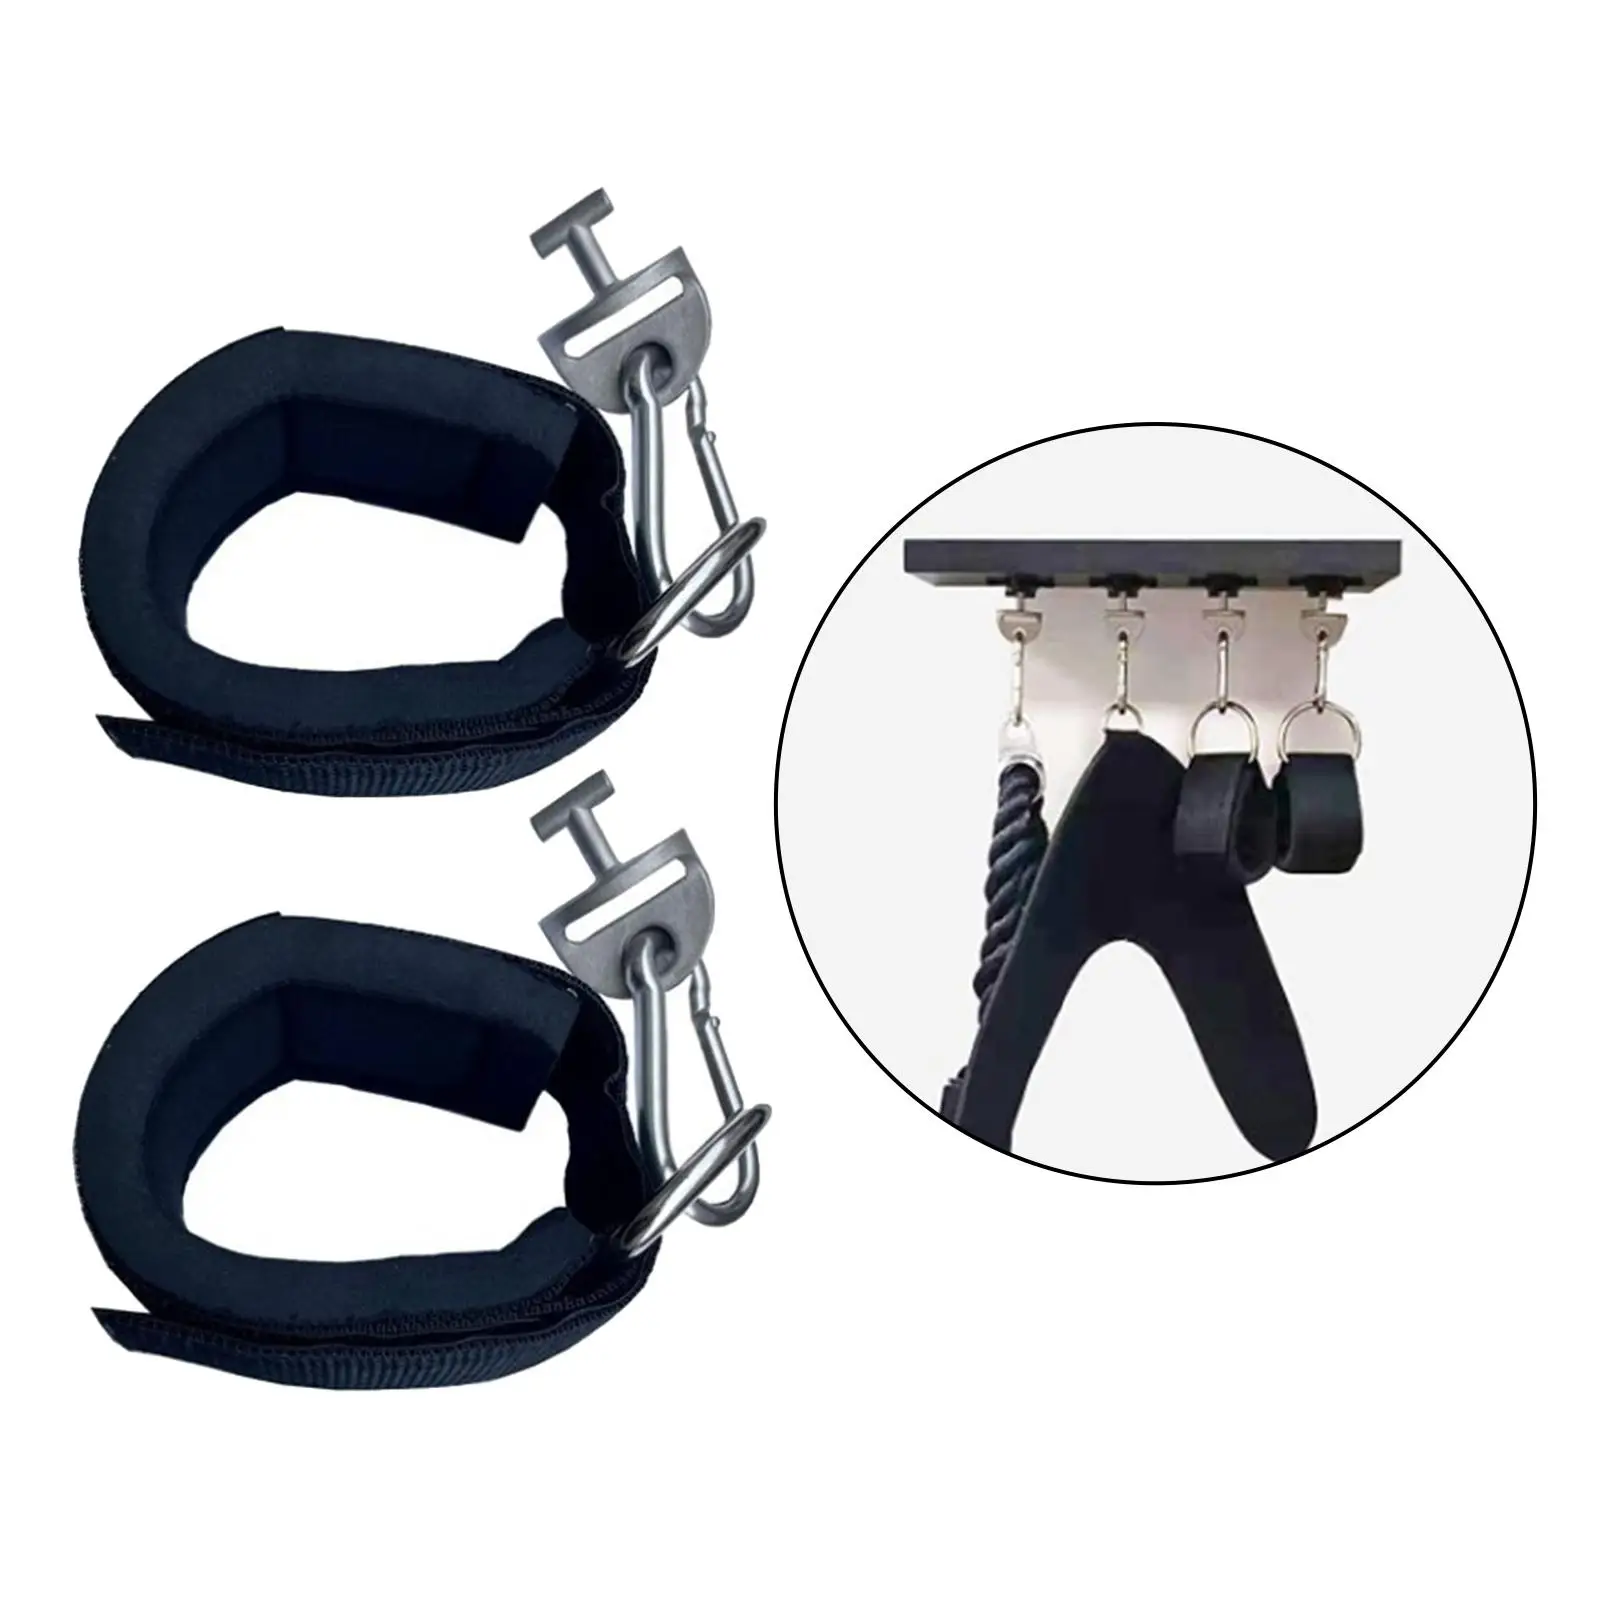 Ankle Straps for Tonal Cable Machine with Tonal Adapters Lower Body Exercises Tonal Attachment for Leg Extensions Hip Abductors